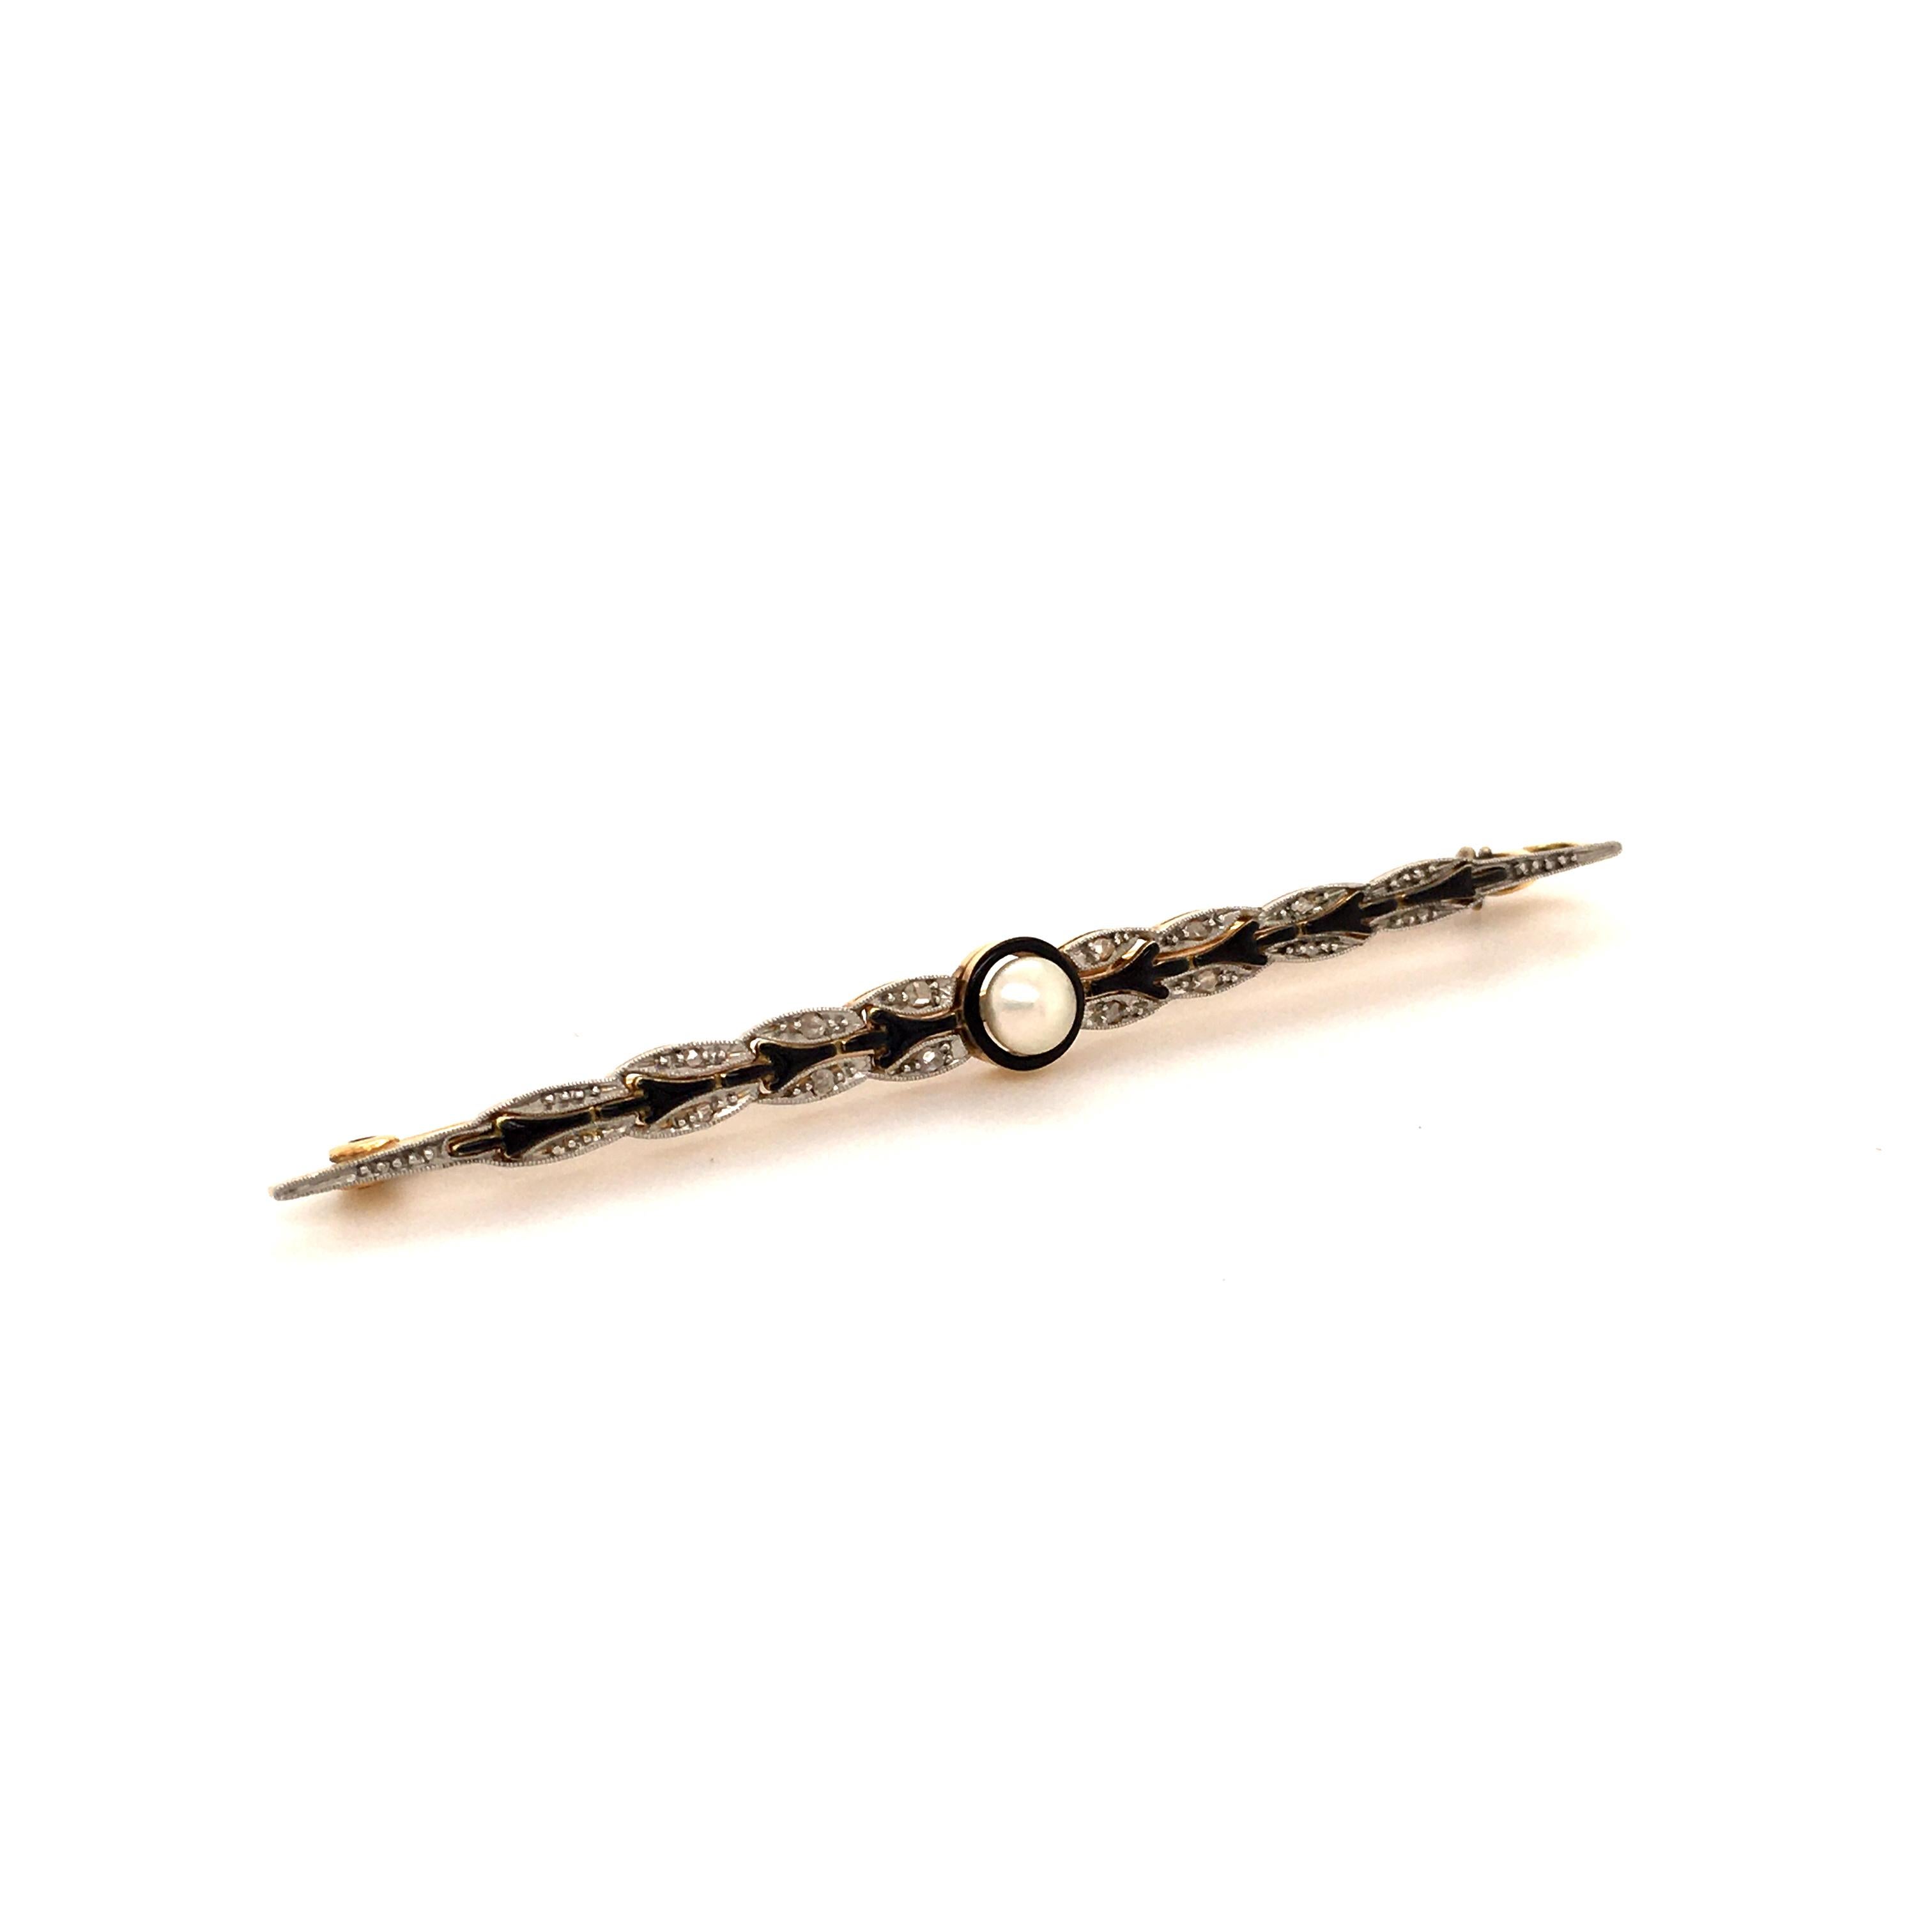 Very cute bar pin in platinum and yellow gold 750. Set with one button shaped Natural Pearl of 4.5 mm in diameter. 12 small rose cut diamonds and black enamel. Very lovely item.

Early Art Déco. 

Length: 7 cm / 2.75 inches
